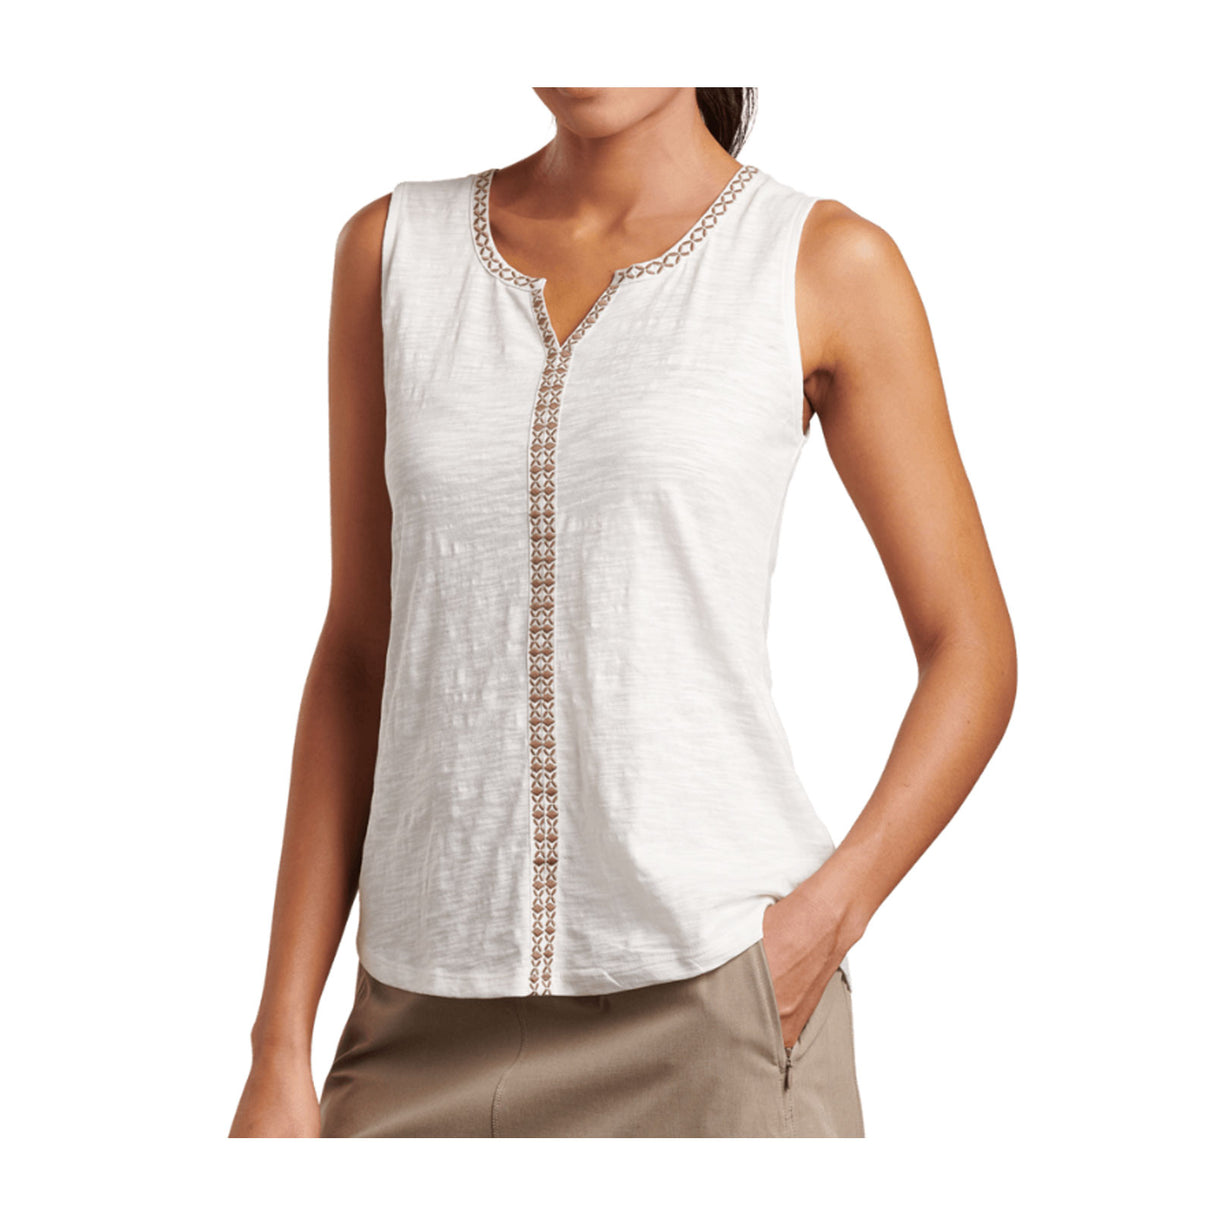 Kuhl Shay Tank Top (Women) - White Apparel - Top - Tank - The Heel Shoe Fitters